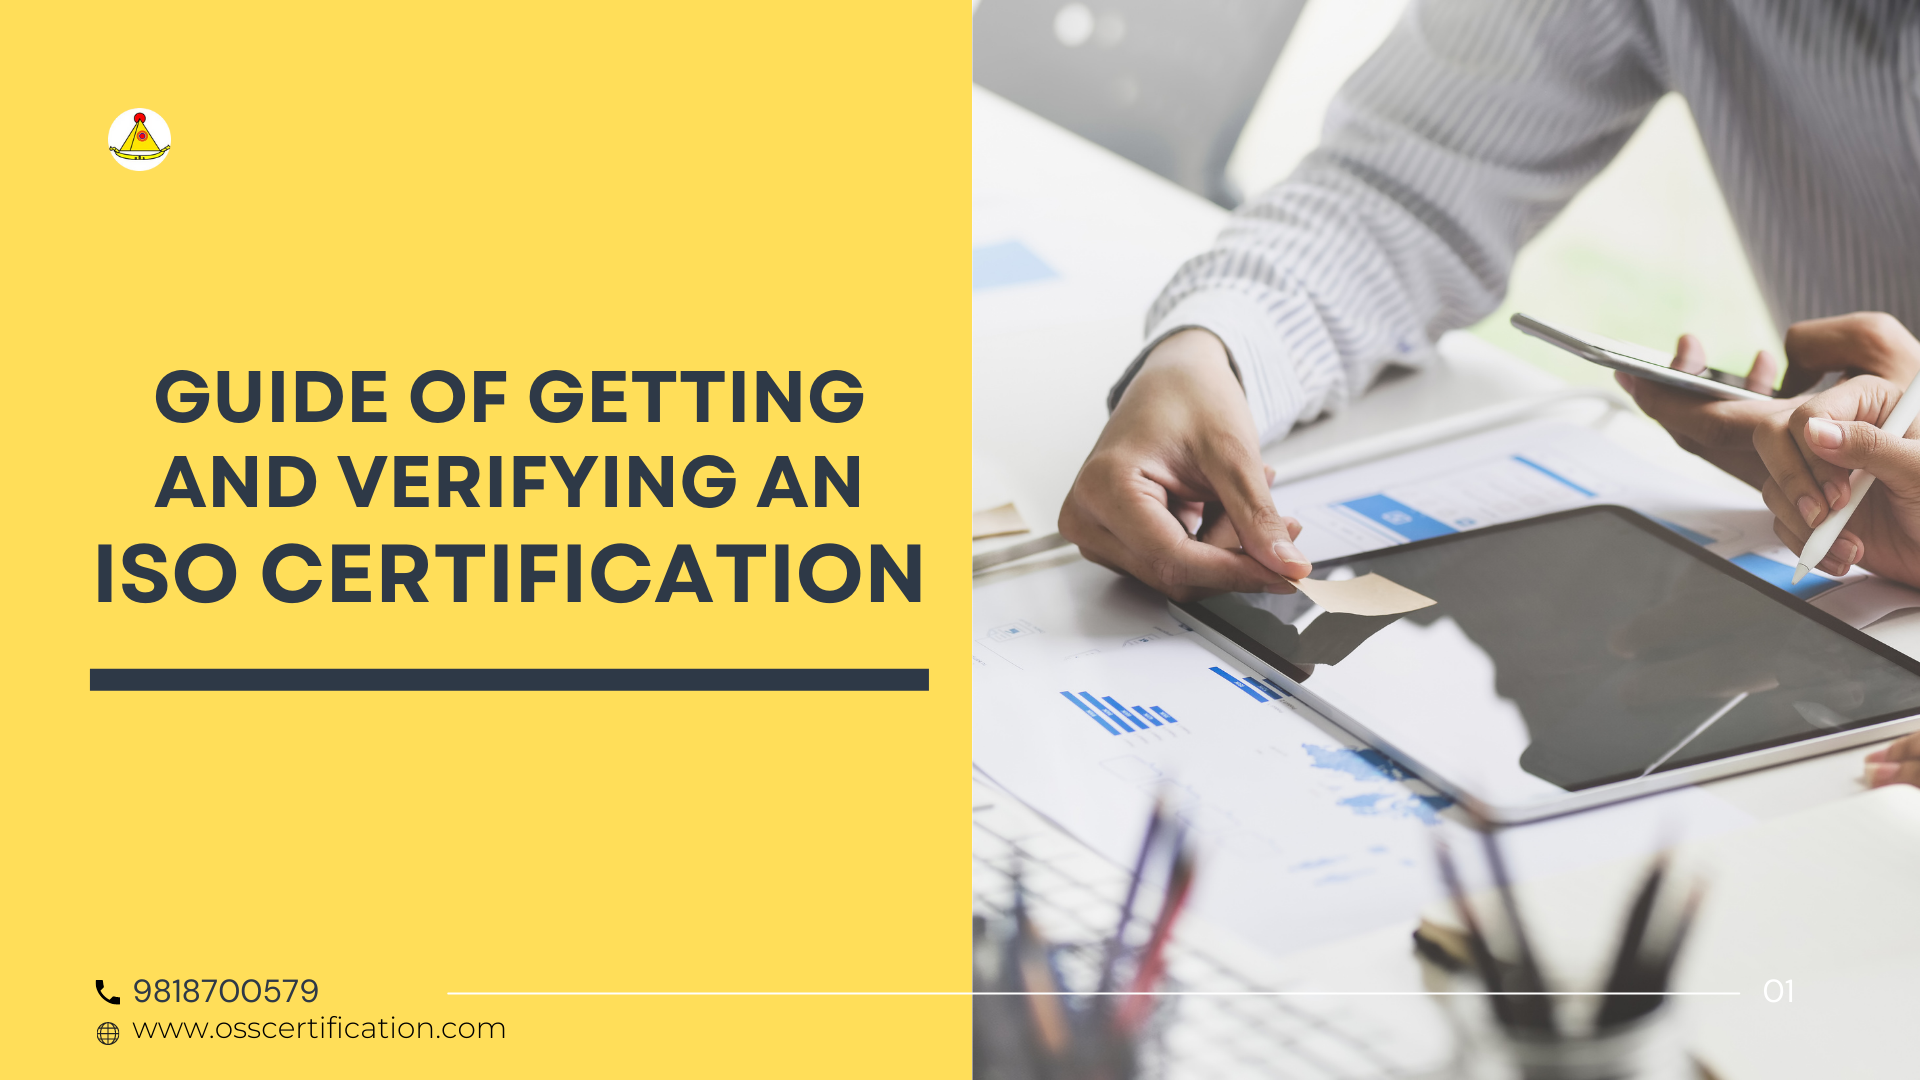 The Complete Guide of Getting and Verifying an ISO Certification In Delhi